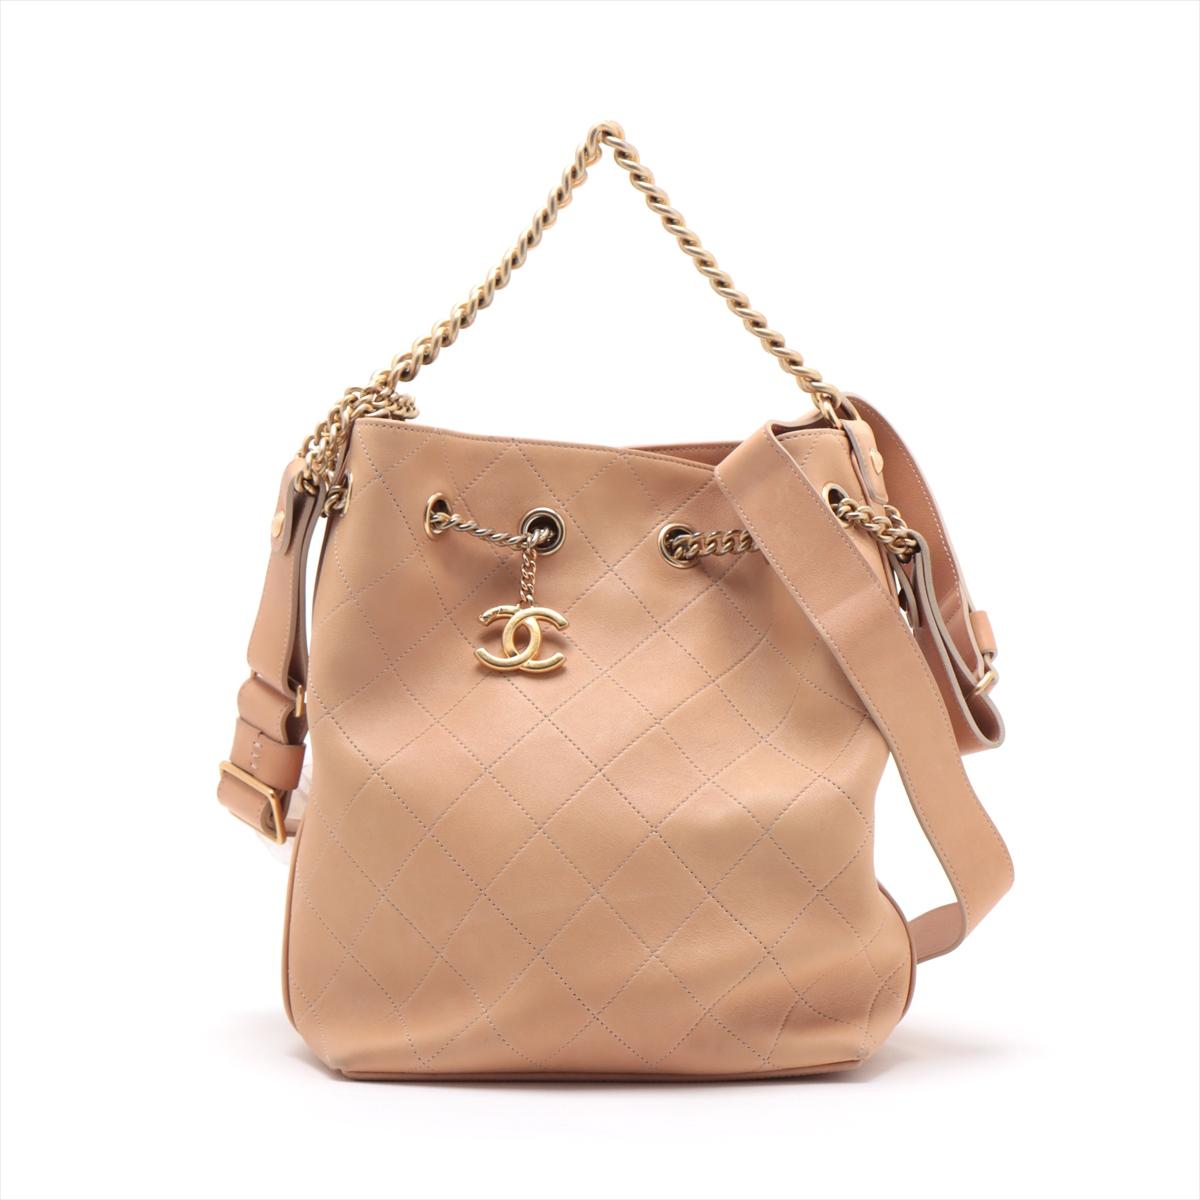 The Chanel Matelassé Drawstring Chain Two-Way Shoulder Bag in Beige is a sophisticated and versatile accessory that seamlessly merges classic elegance with modern functionality. Crafted with meticulous attention to detail, the iconic matelassé